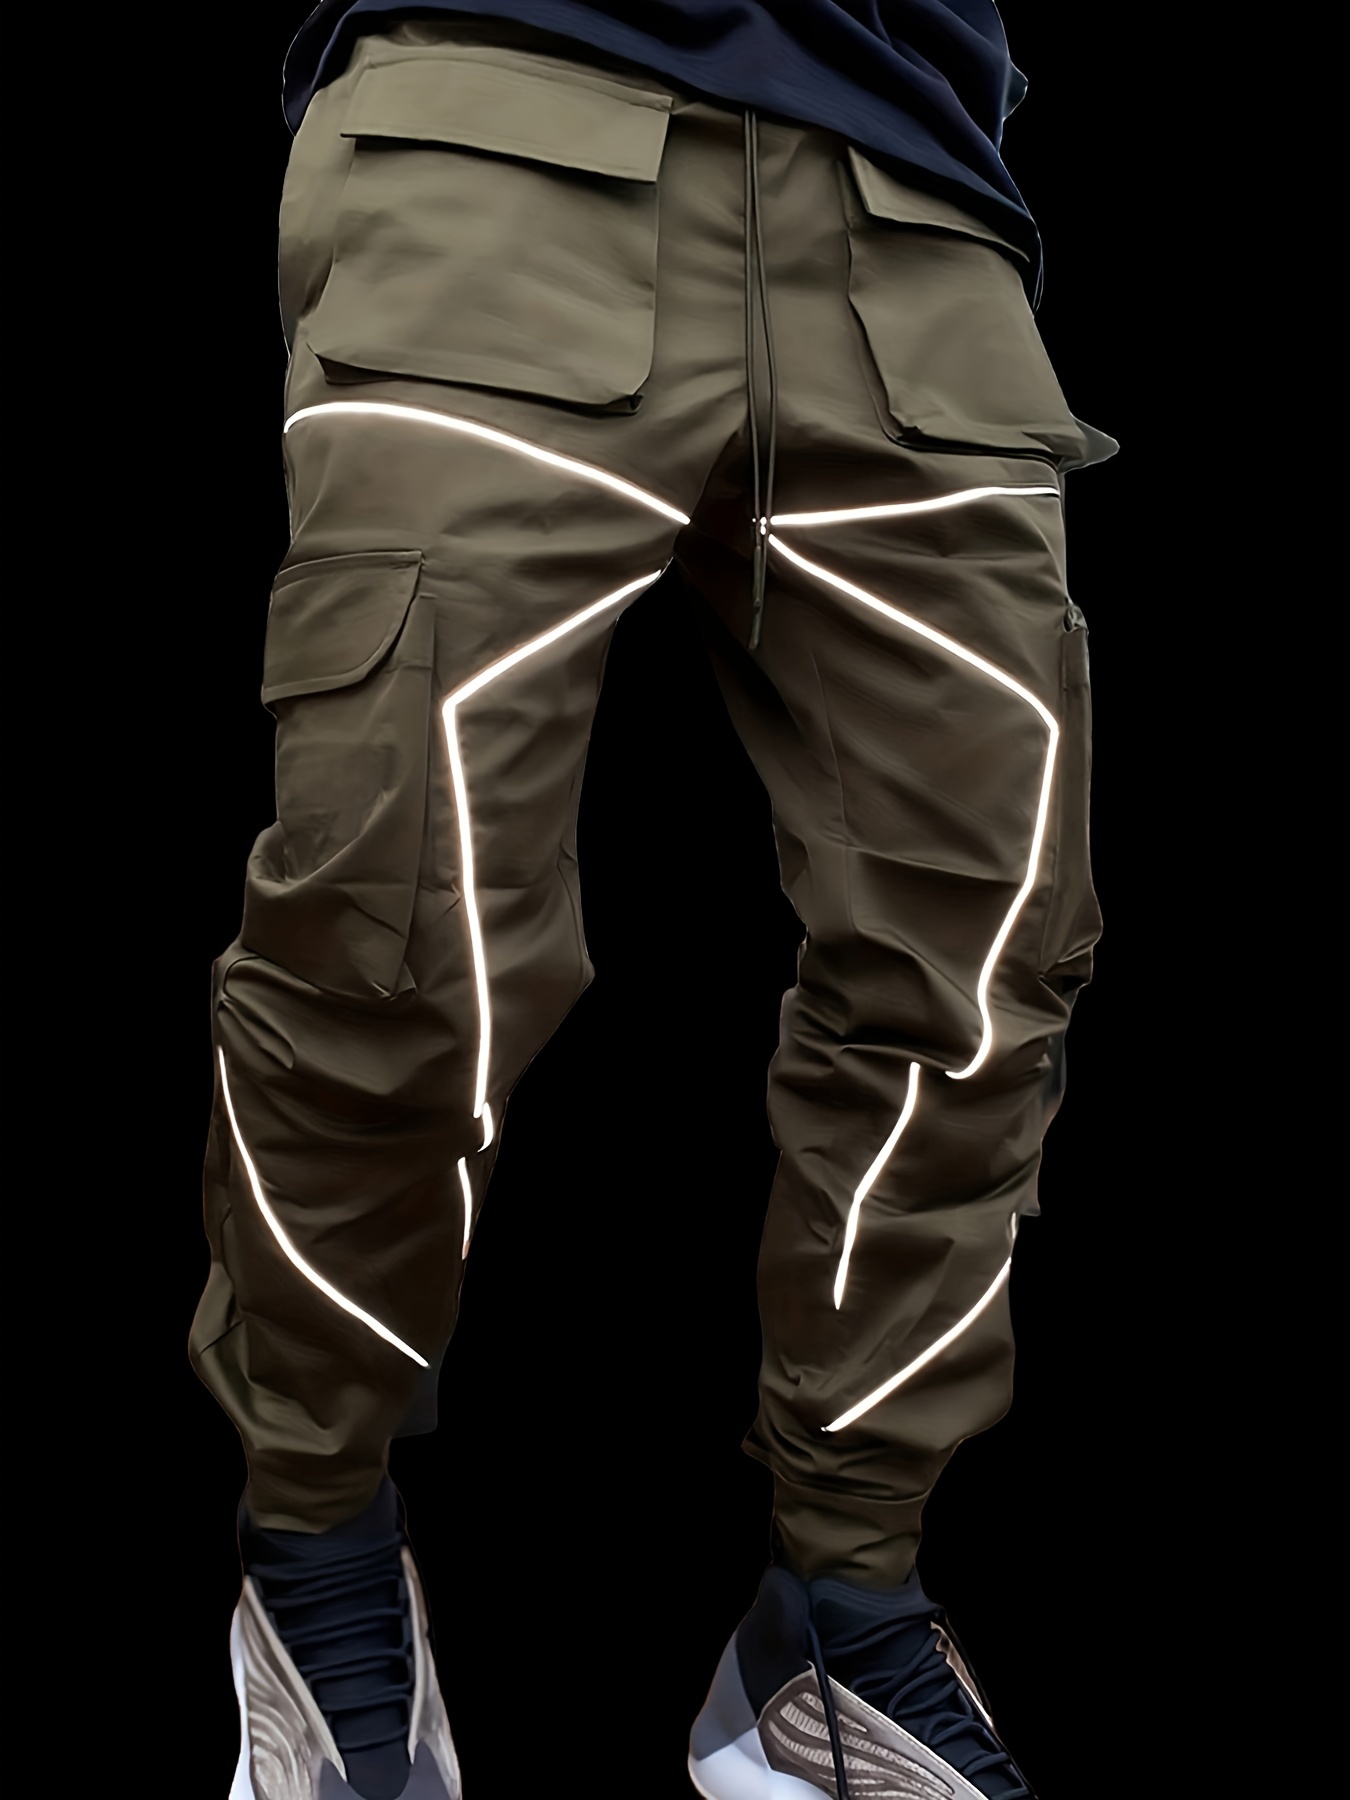 Trendy Neon Green Cargo Pants with Reflective Stripes